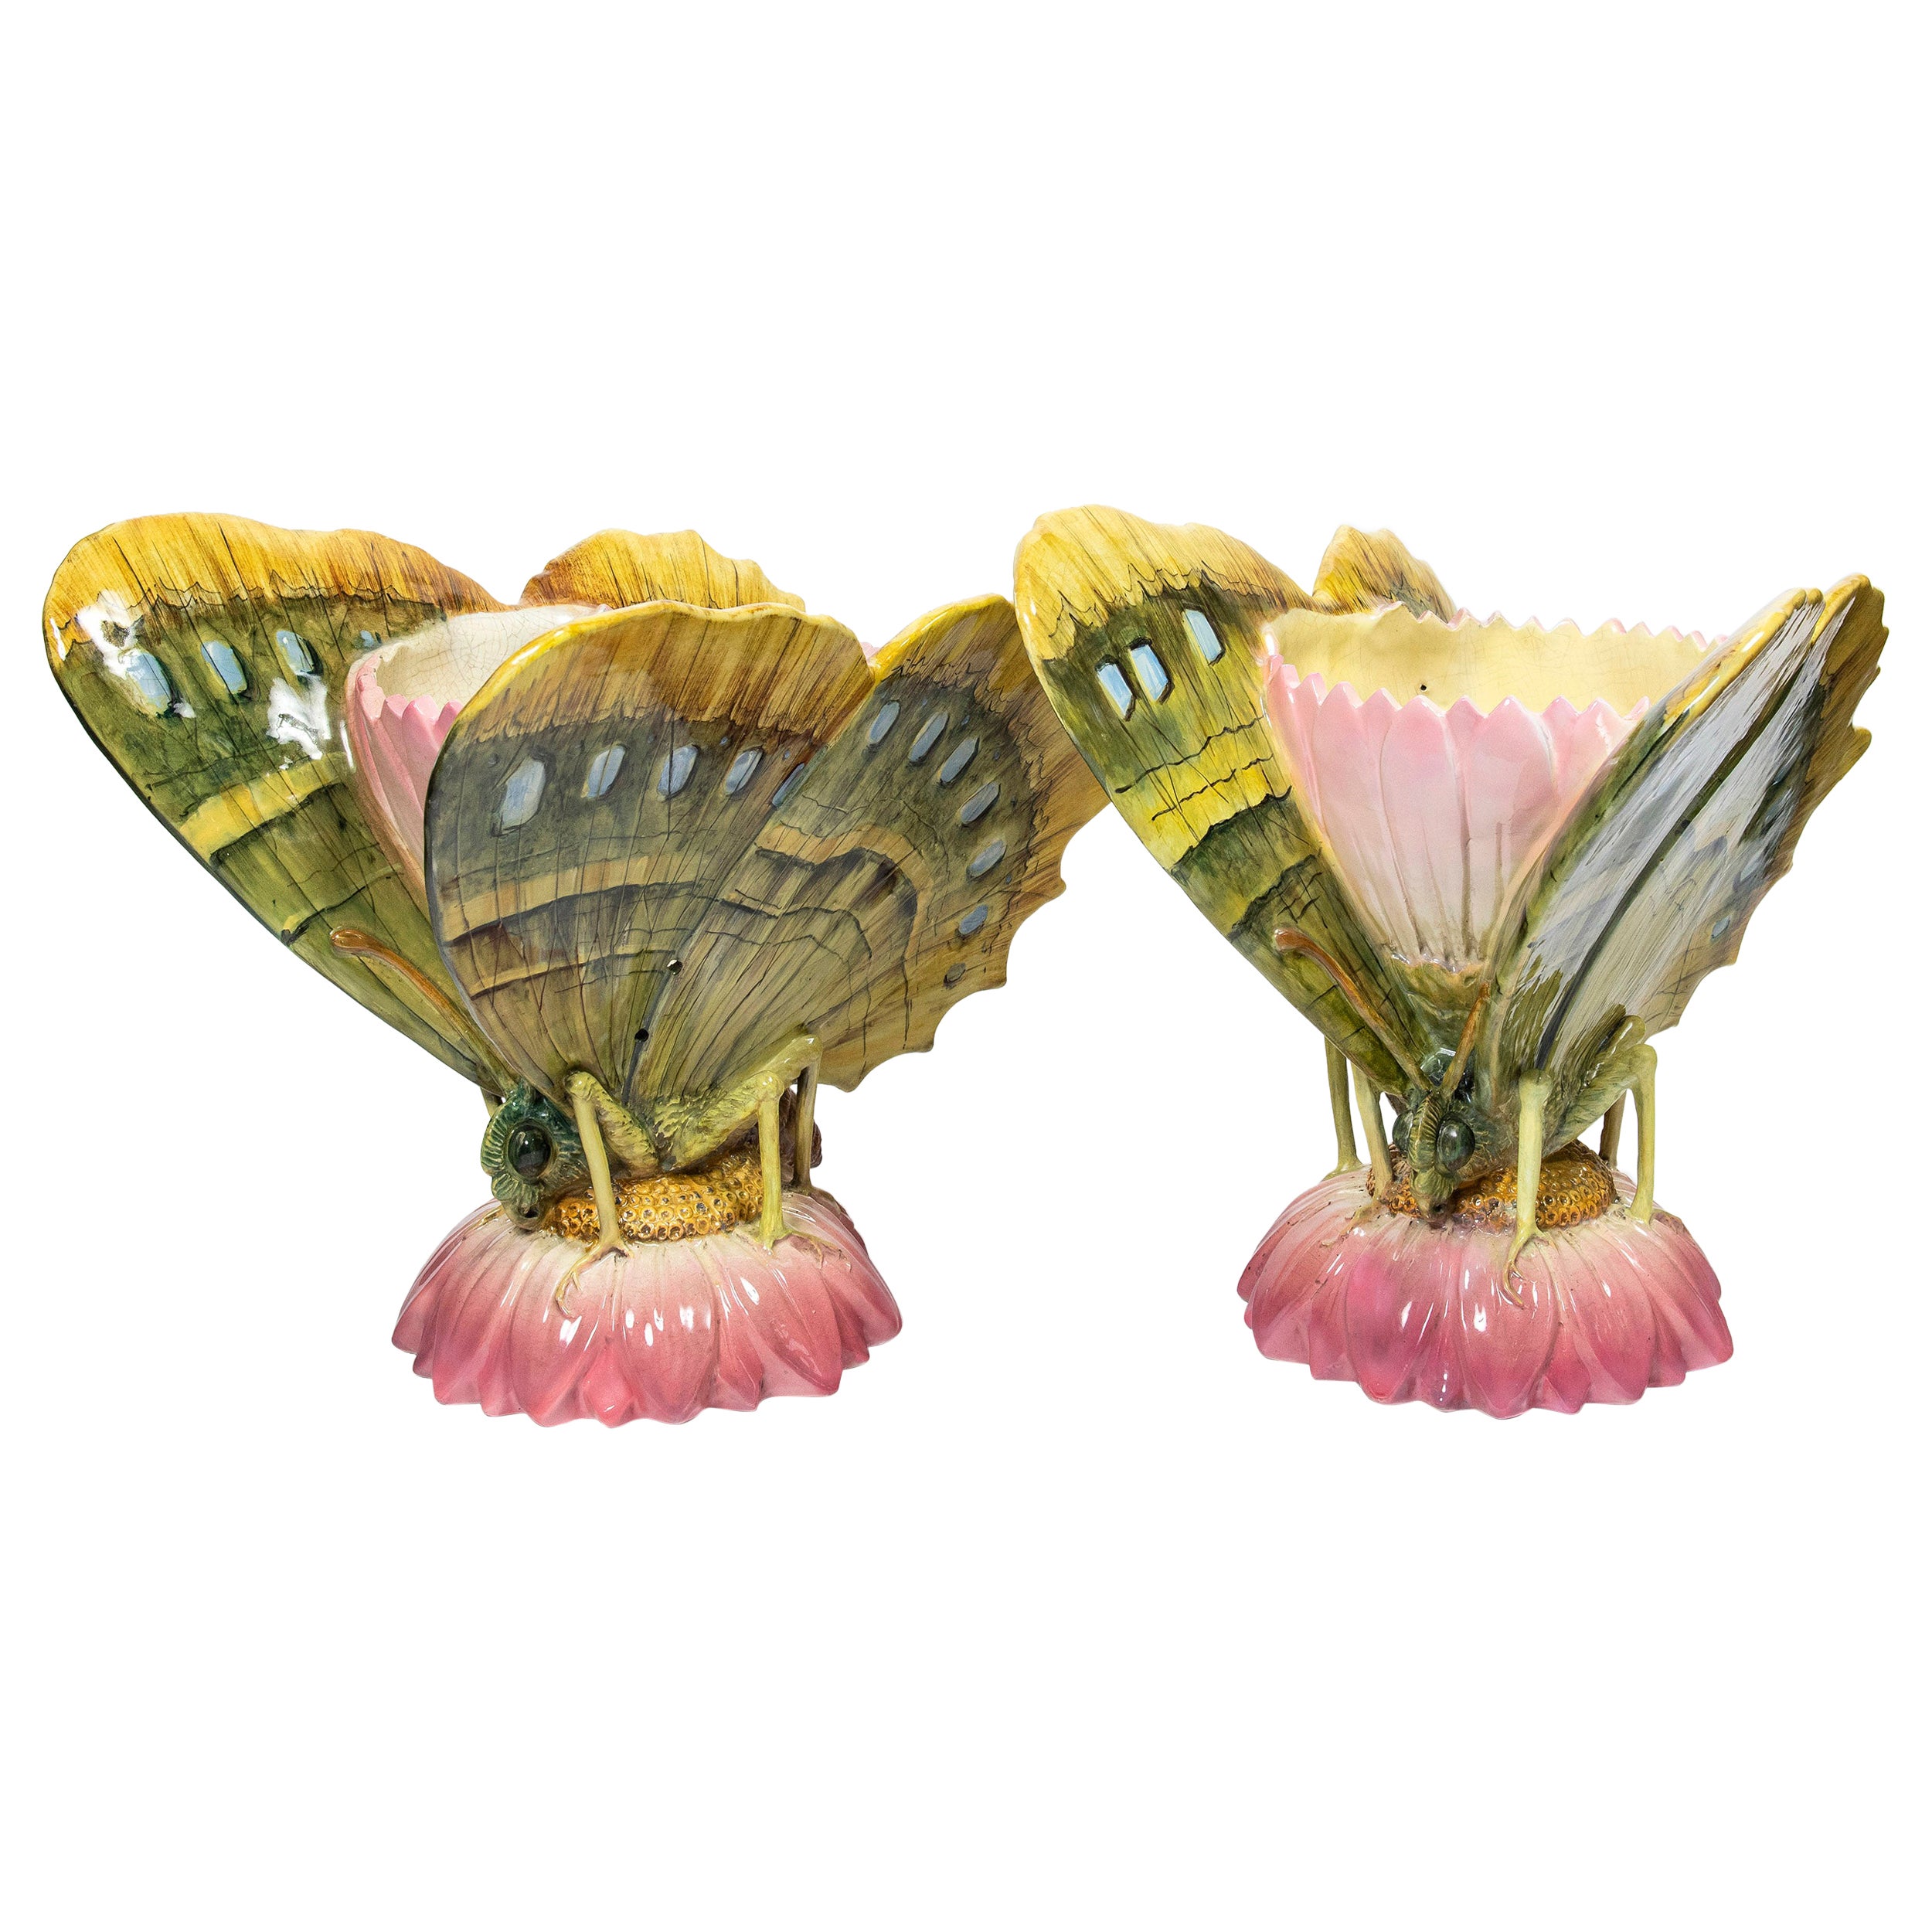 Pair of Glazed Ceramic Butterflies Planters by Delphin Massier, France, c. 1890 For Sale